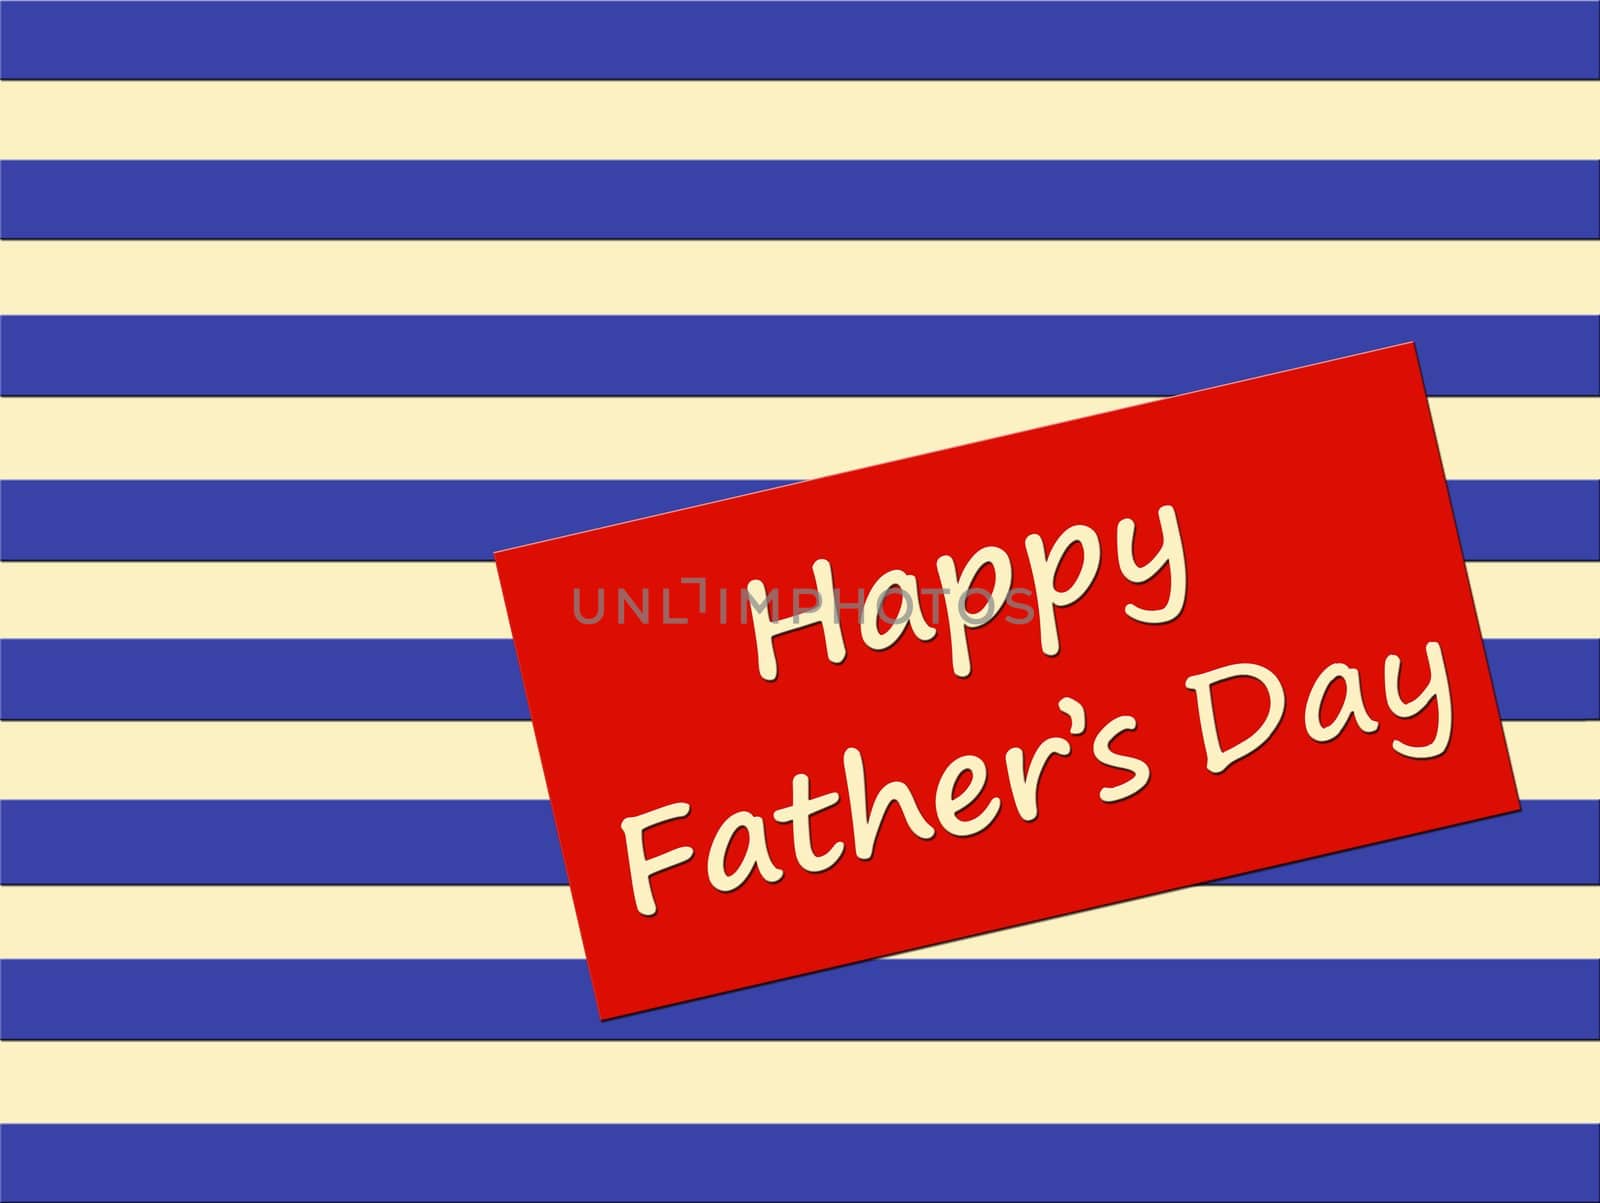 Happy Father's Day card with a blue and beige striped background